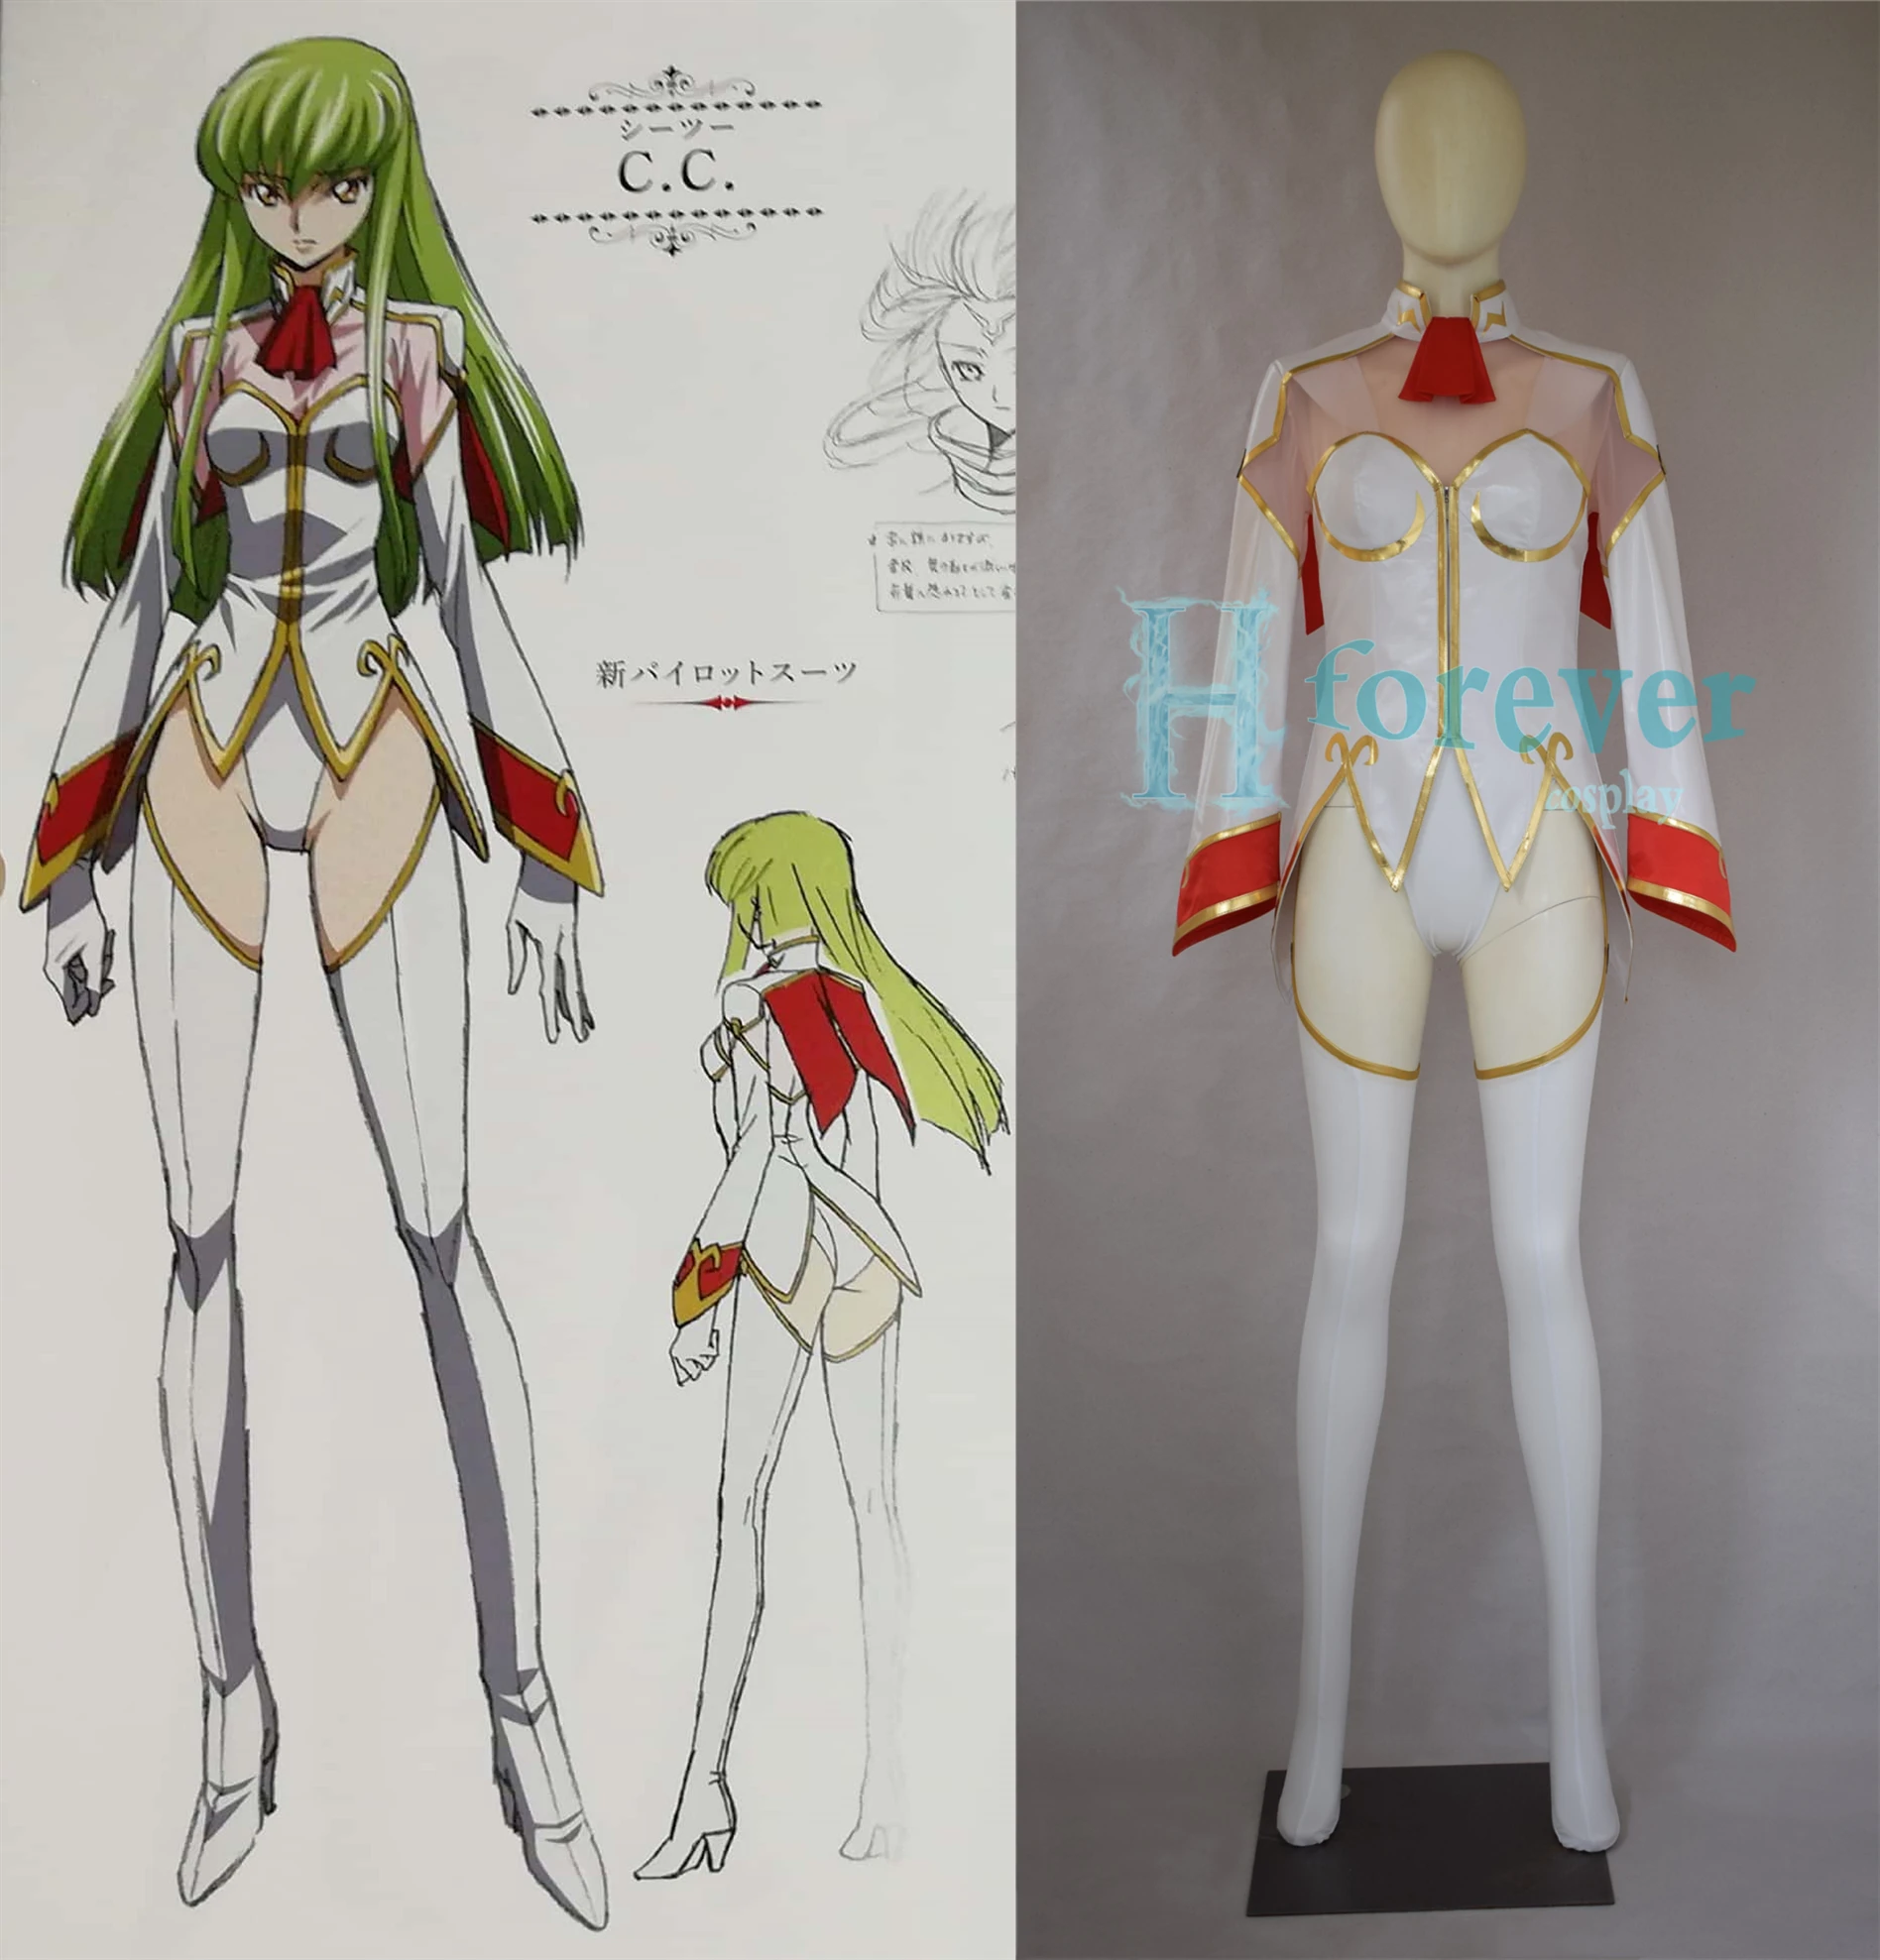 

COS-HoHo [Customized] Anime Code Geass CC Driving Suit Uniform Cosplay Costume Halloween Carnival Party Role Play Outfit Women